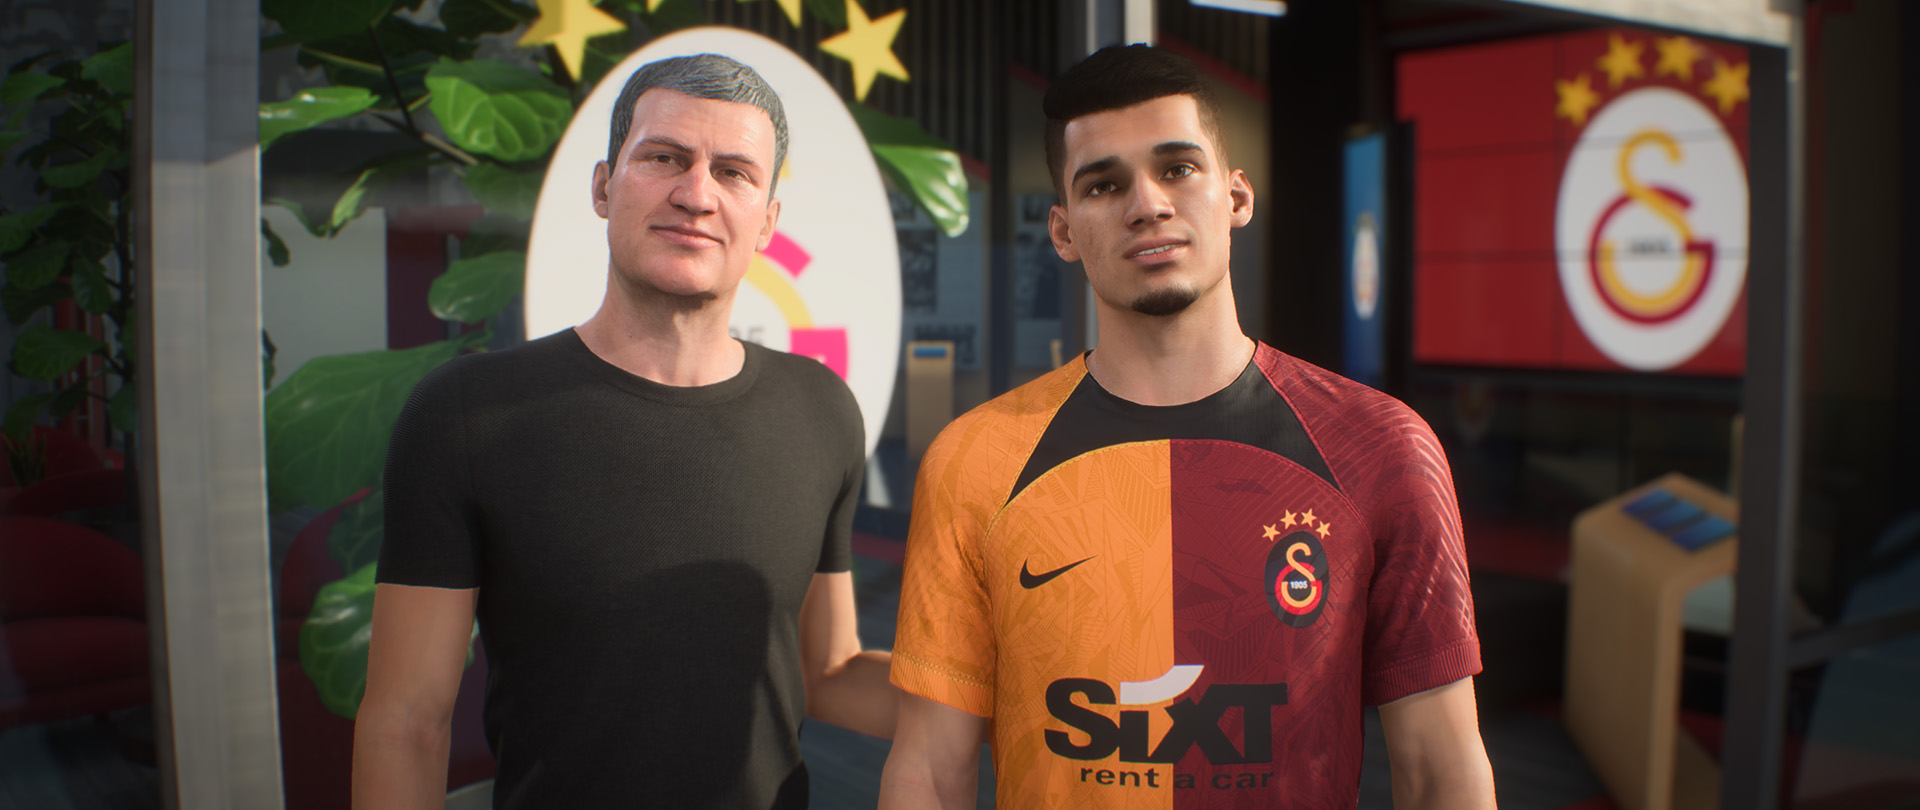 Failed Wonderkids To Revive In FIFA 23 Career Mode